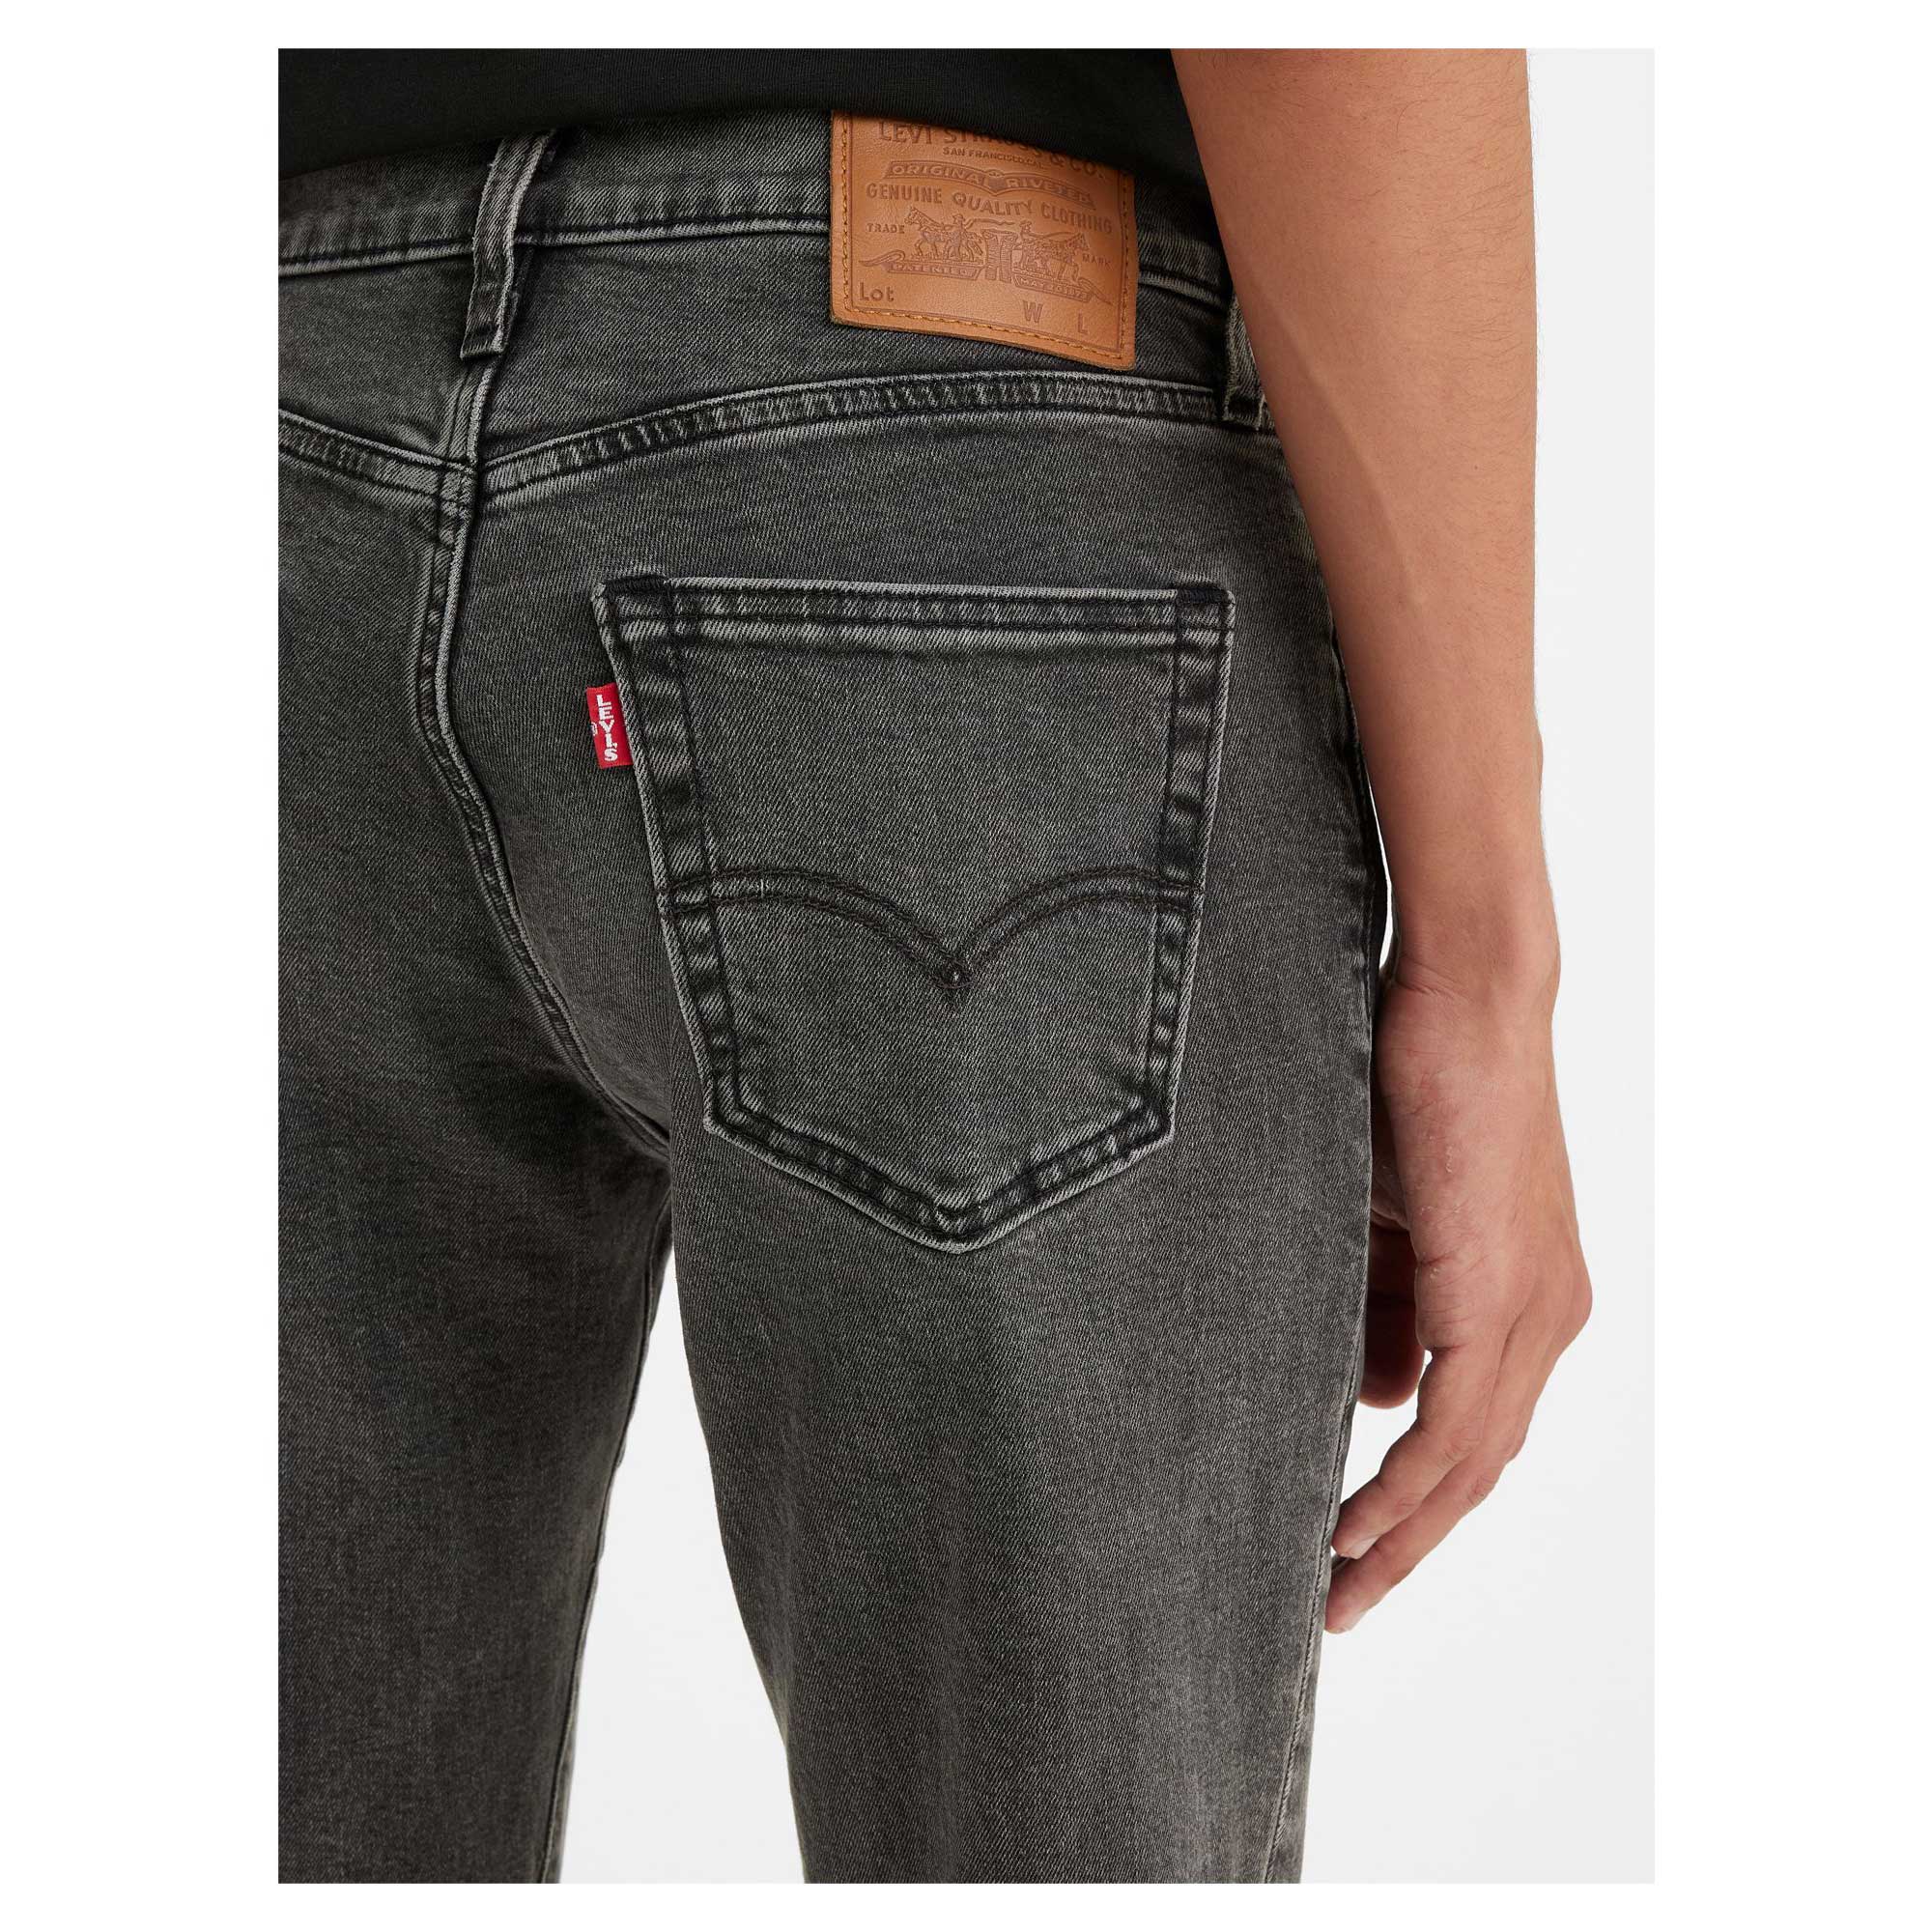 Levi's 550 '92 Relaxed, longboards, a3418-0004 – Norwood